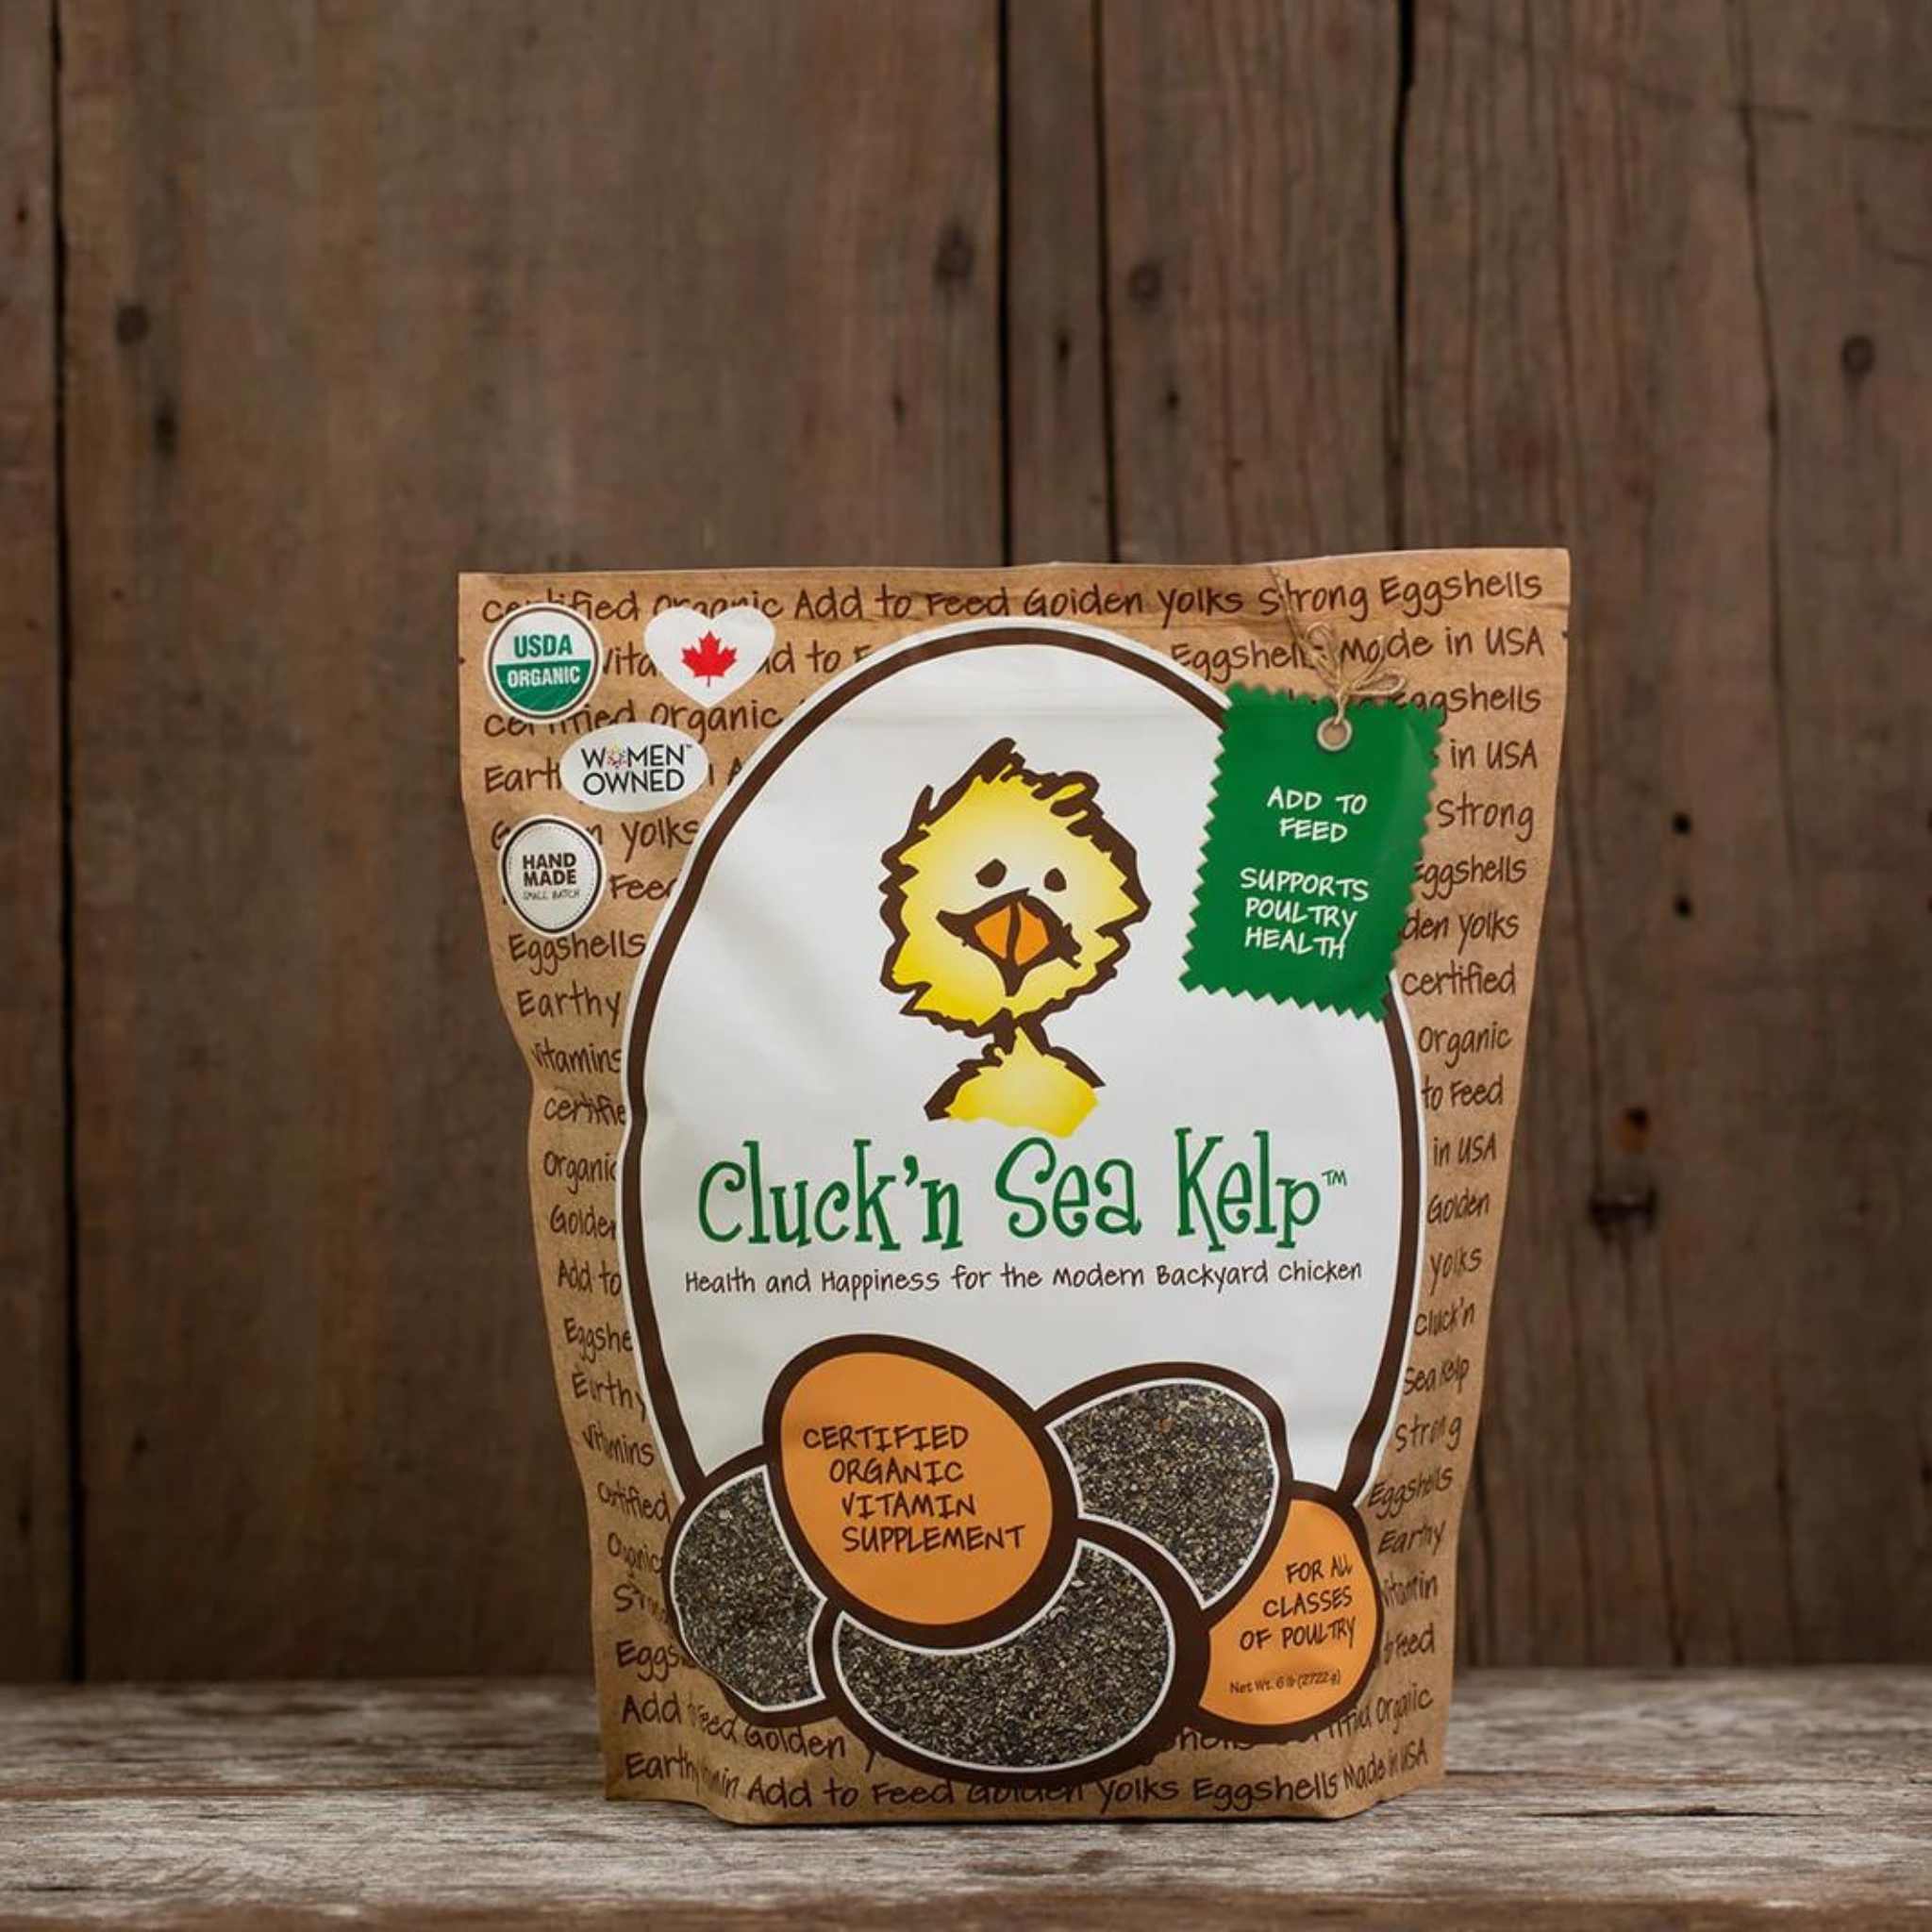 Hatching Time Treats for Chickens. Cluck'n Sea Kelp can be seen on wooden table. Bag shows certified organic vitamin supplement for chickens. Rated for all classes of poultry. Made to support poultry health.